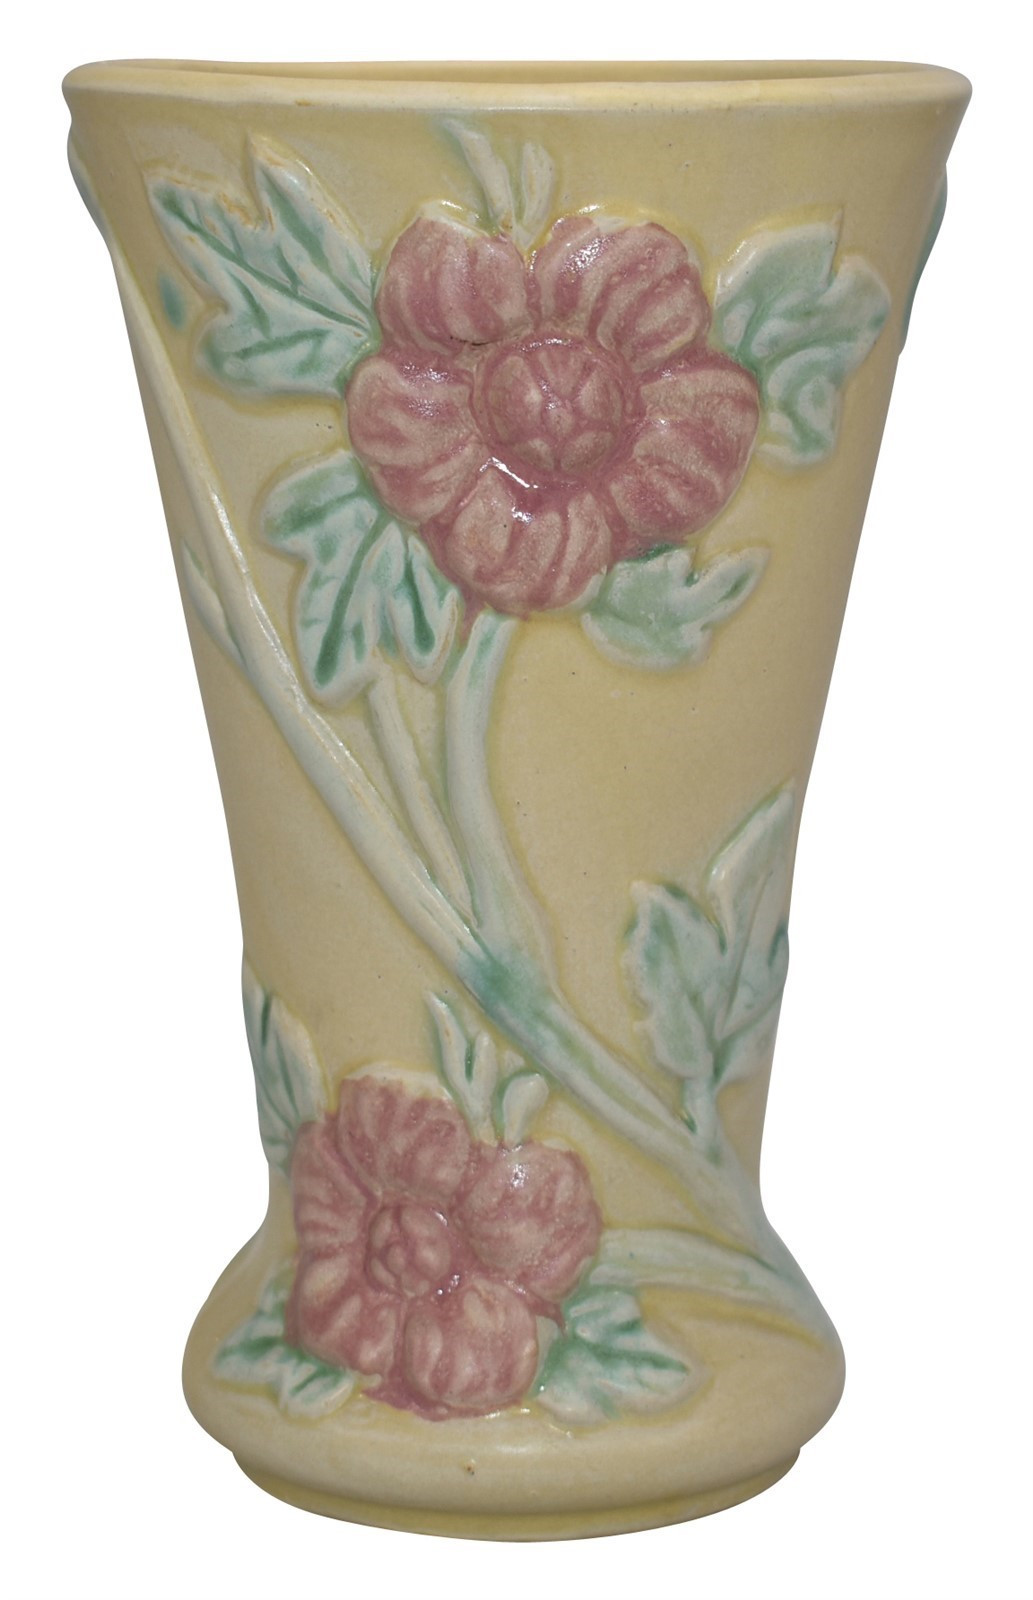 23 Fabulous Van Briggle Tulip Vase 2024 free download van briggle tulip vase of hull pottery crab apple yellow floral vase 50 just art pottery intended for hull pottery crab apple yellow floral vase 50